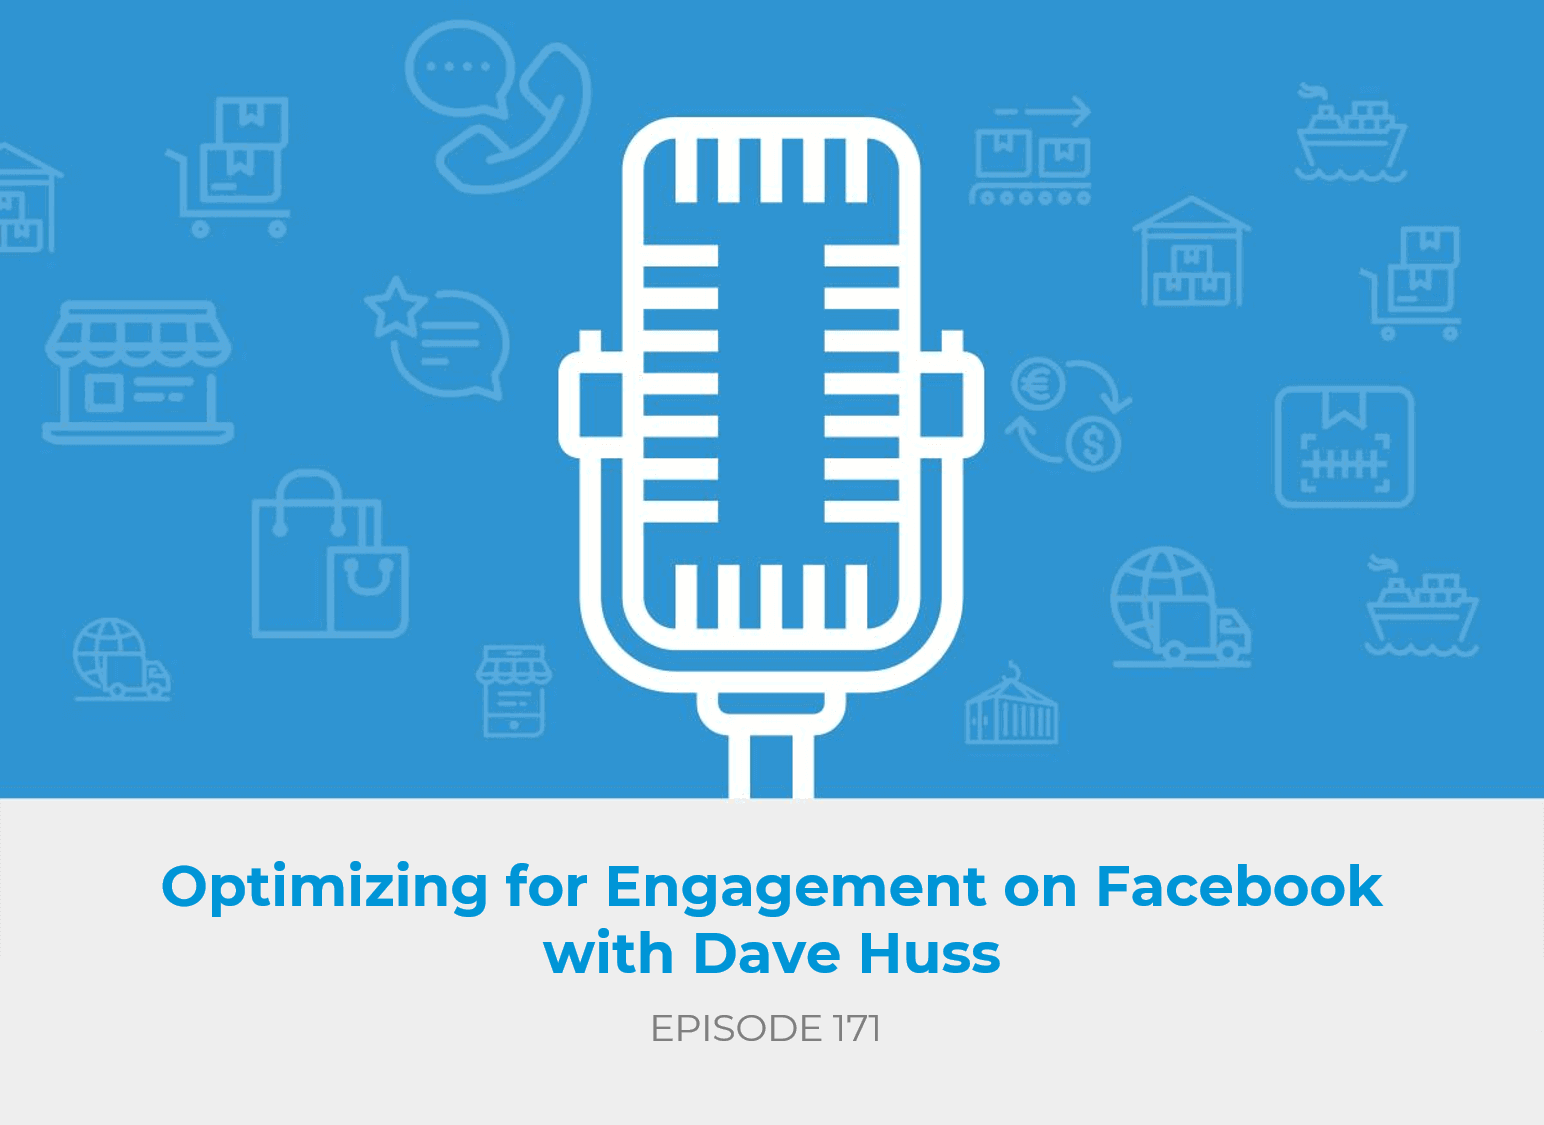 Optimizing for Engagement on Facebook with Dave Huss